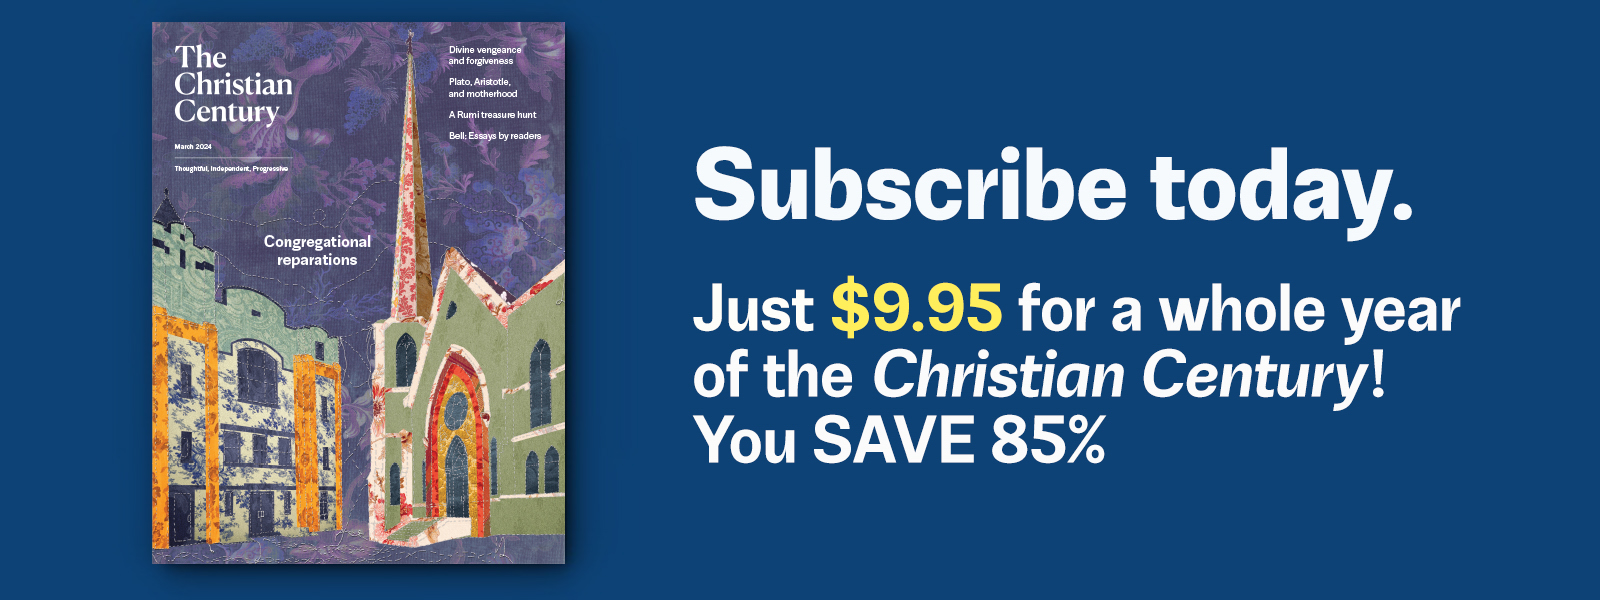 Image showing magazine cover and $9.95/year subscription offer